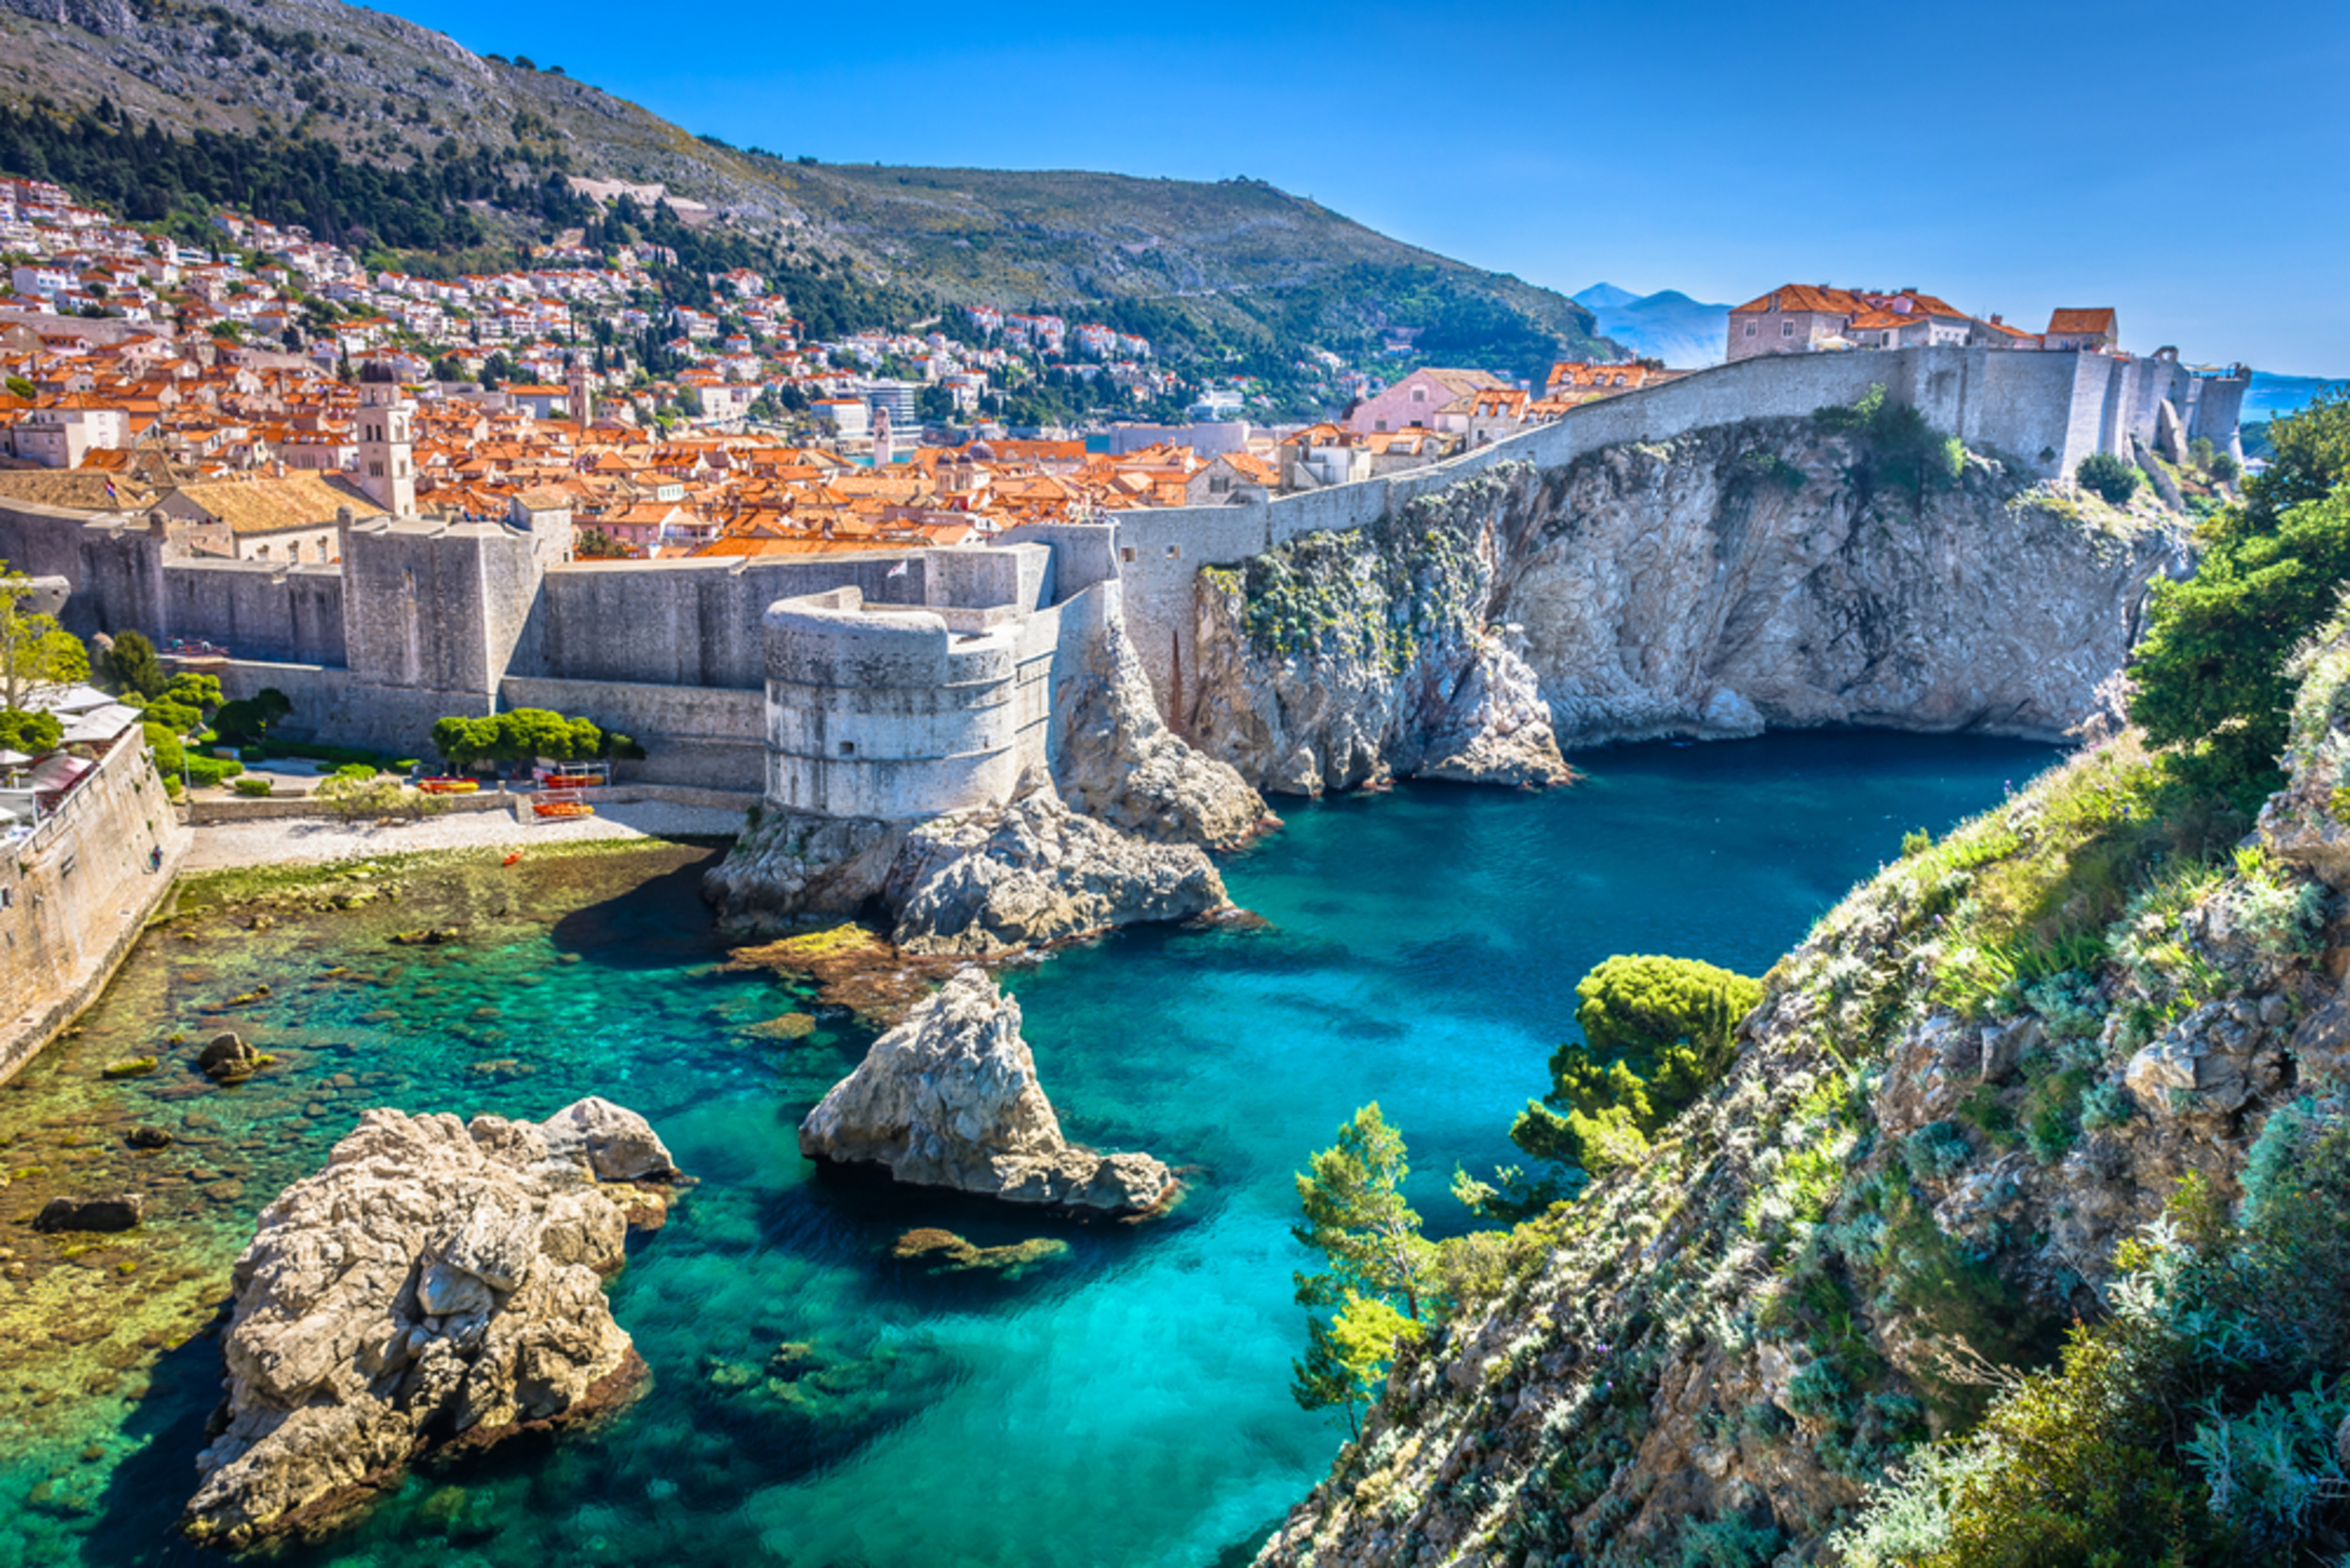 <p>Both a gorgeous city in its own right and a great place to set your home base for exploring Croatia's vast natural beauty, Dubrovnik is a popular destination for "Game of Thrones" fans searching out sites where the show was filmed. </p><p><a href='https://www.msn.com/en-us/community/channel/vid-cj9pqbr0vn9in2b6ddcd8sfgpfq6x6utp44fssrv6mc2gtybw0us'>Follow us on MSN to see more of our exclusive lifestyle content.</a></p>